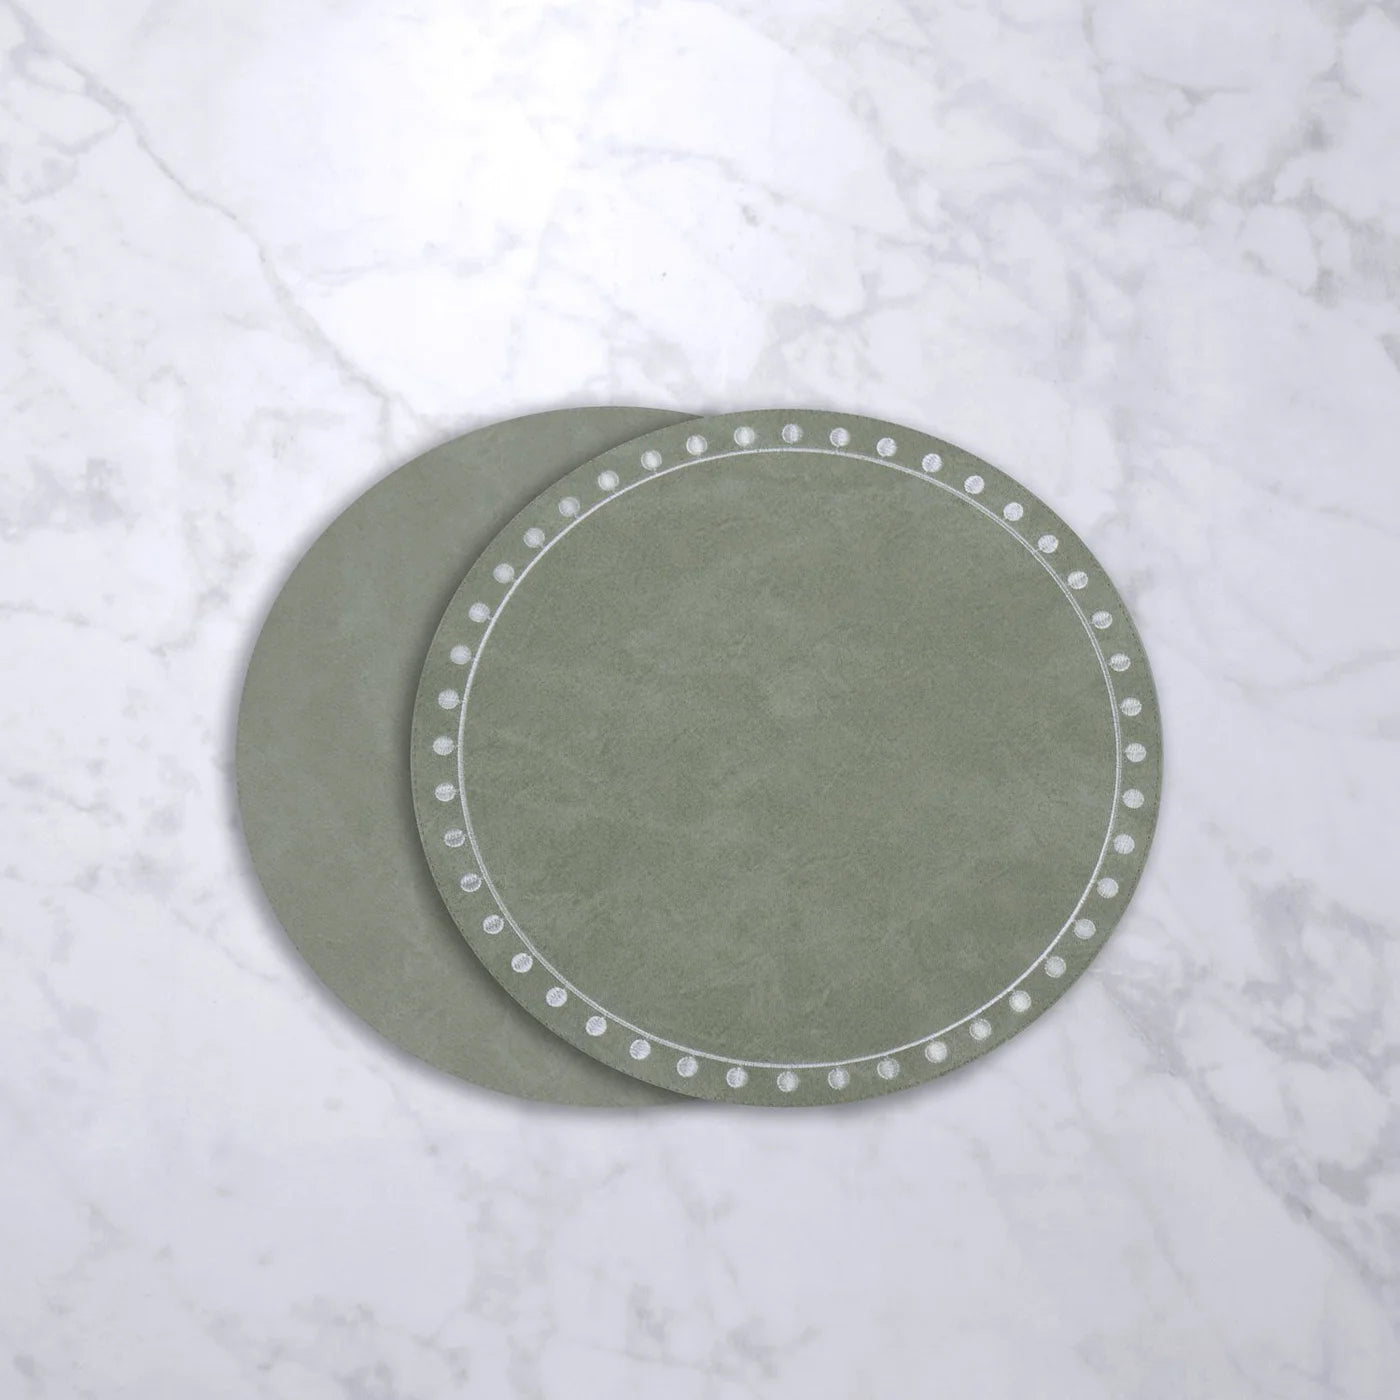 VIDA Round Embroidered Dots 15.5" Round Placemats Set of 4 (Green and White)